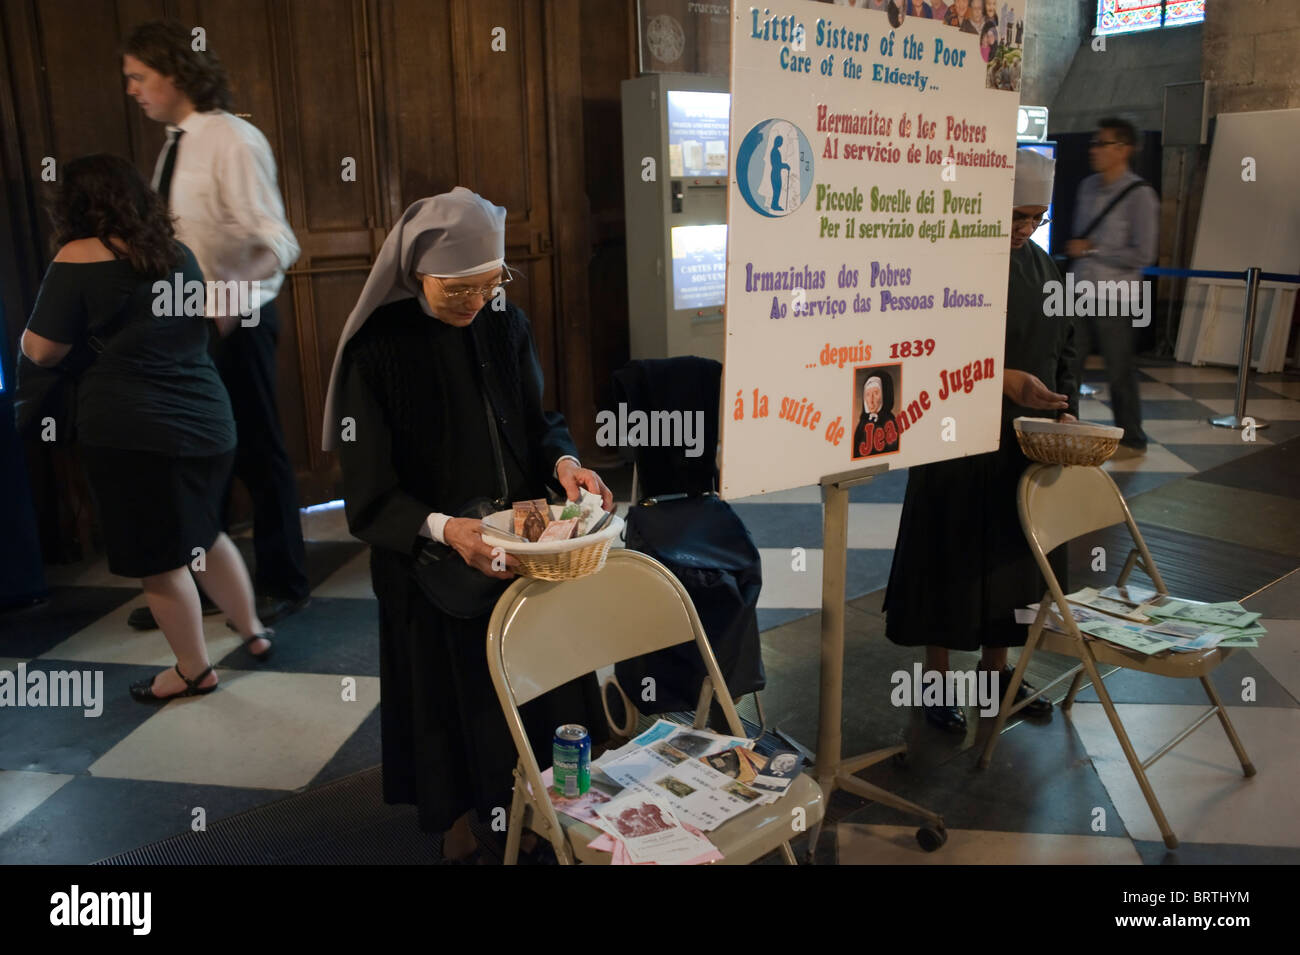 Paris, France - Catholic Nun Collecting Contributions, Money from Public, inside Notre Dame Cathedral, different cultures religion, French Catholic Church, european religious practice Stock Photo